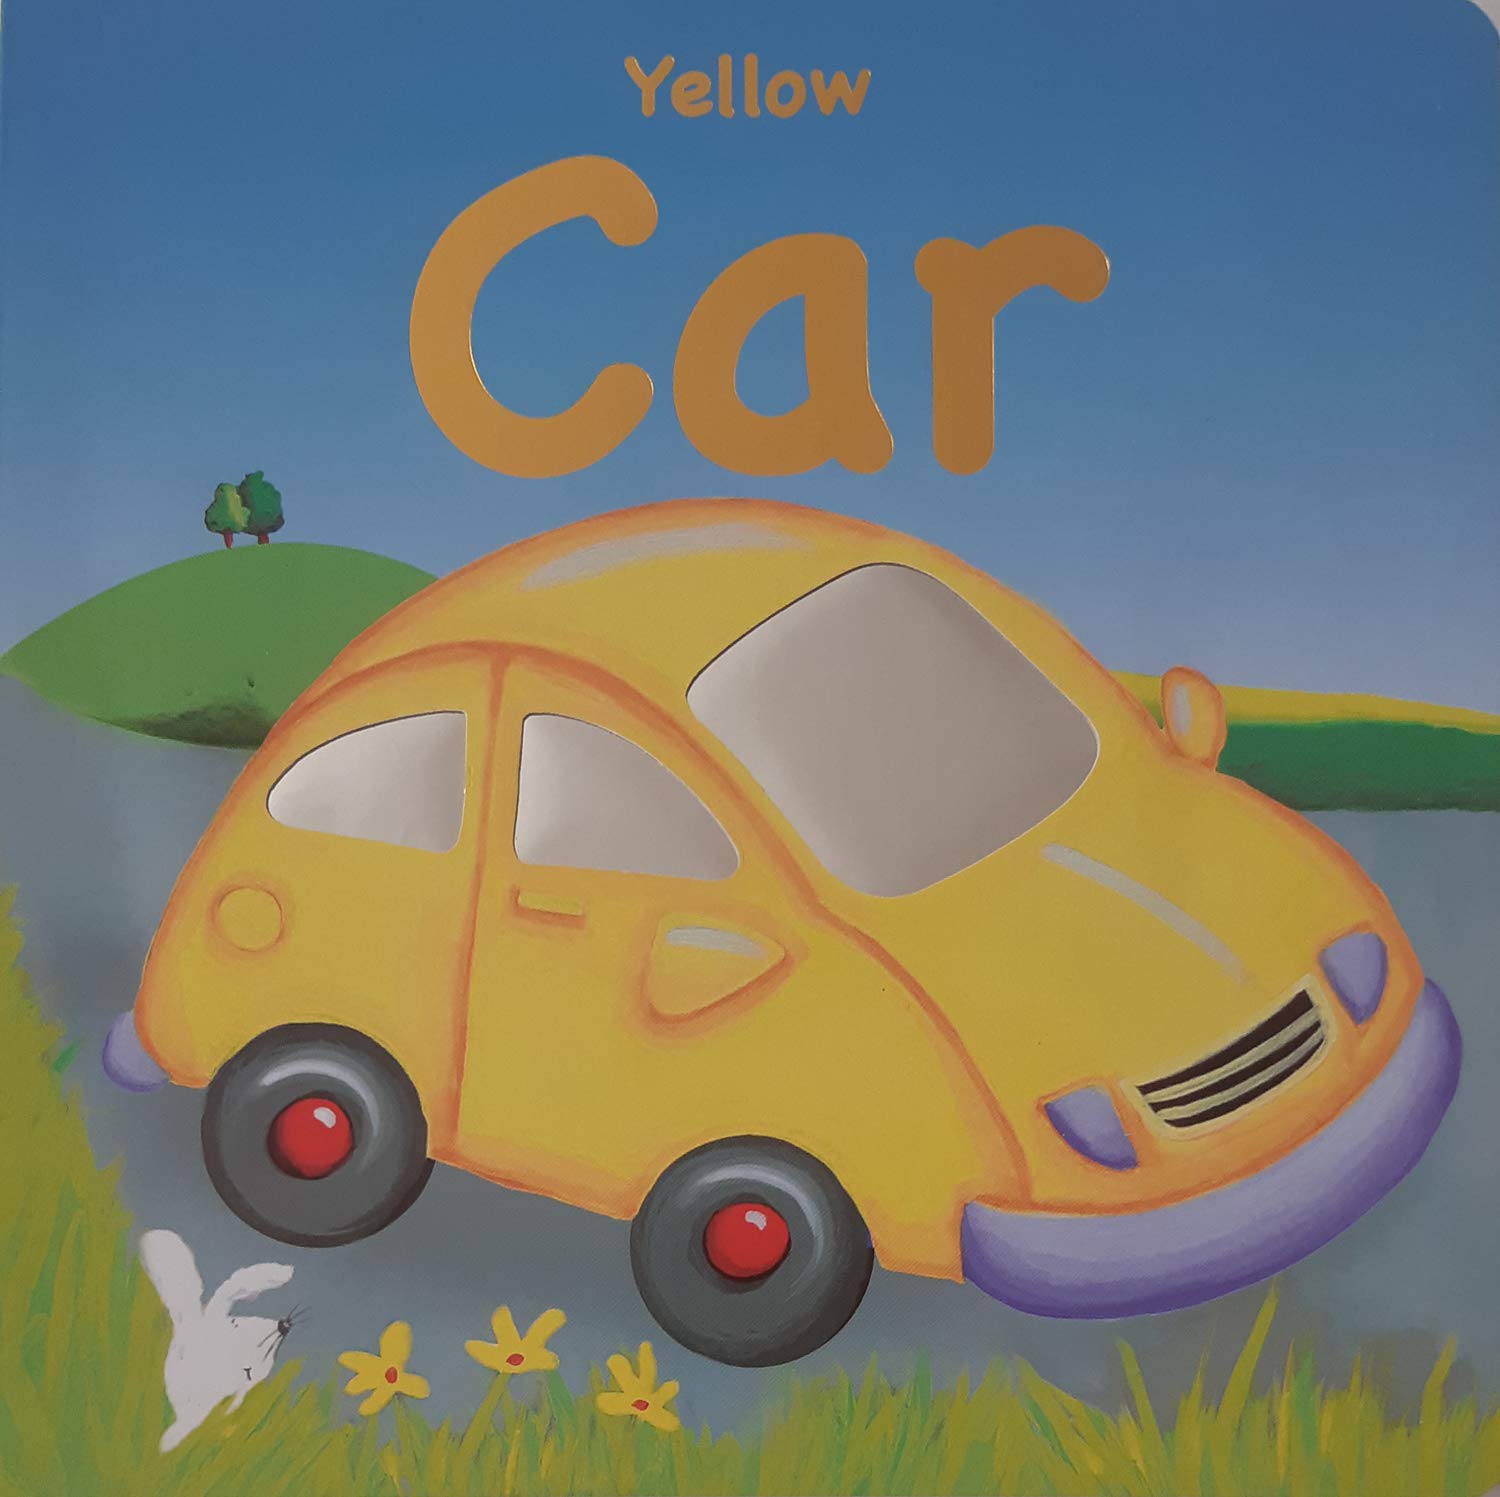 IMG : The yellow car